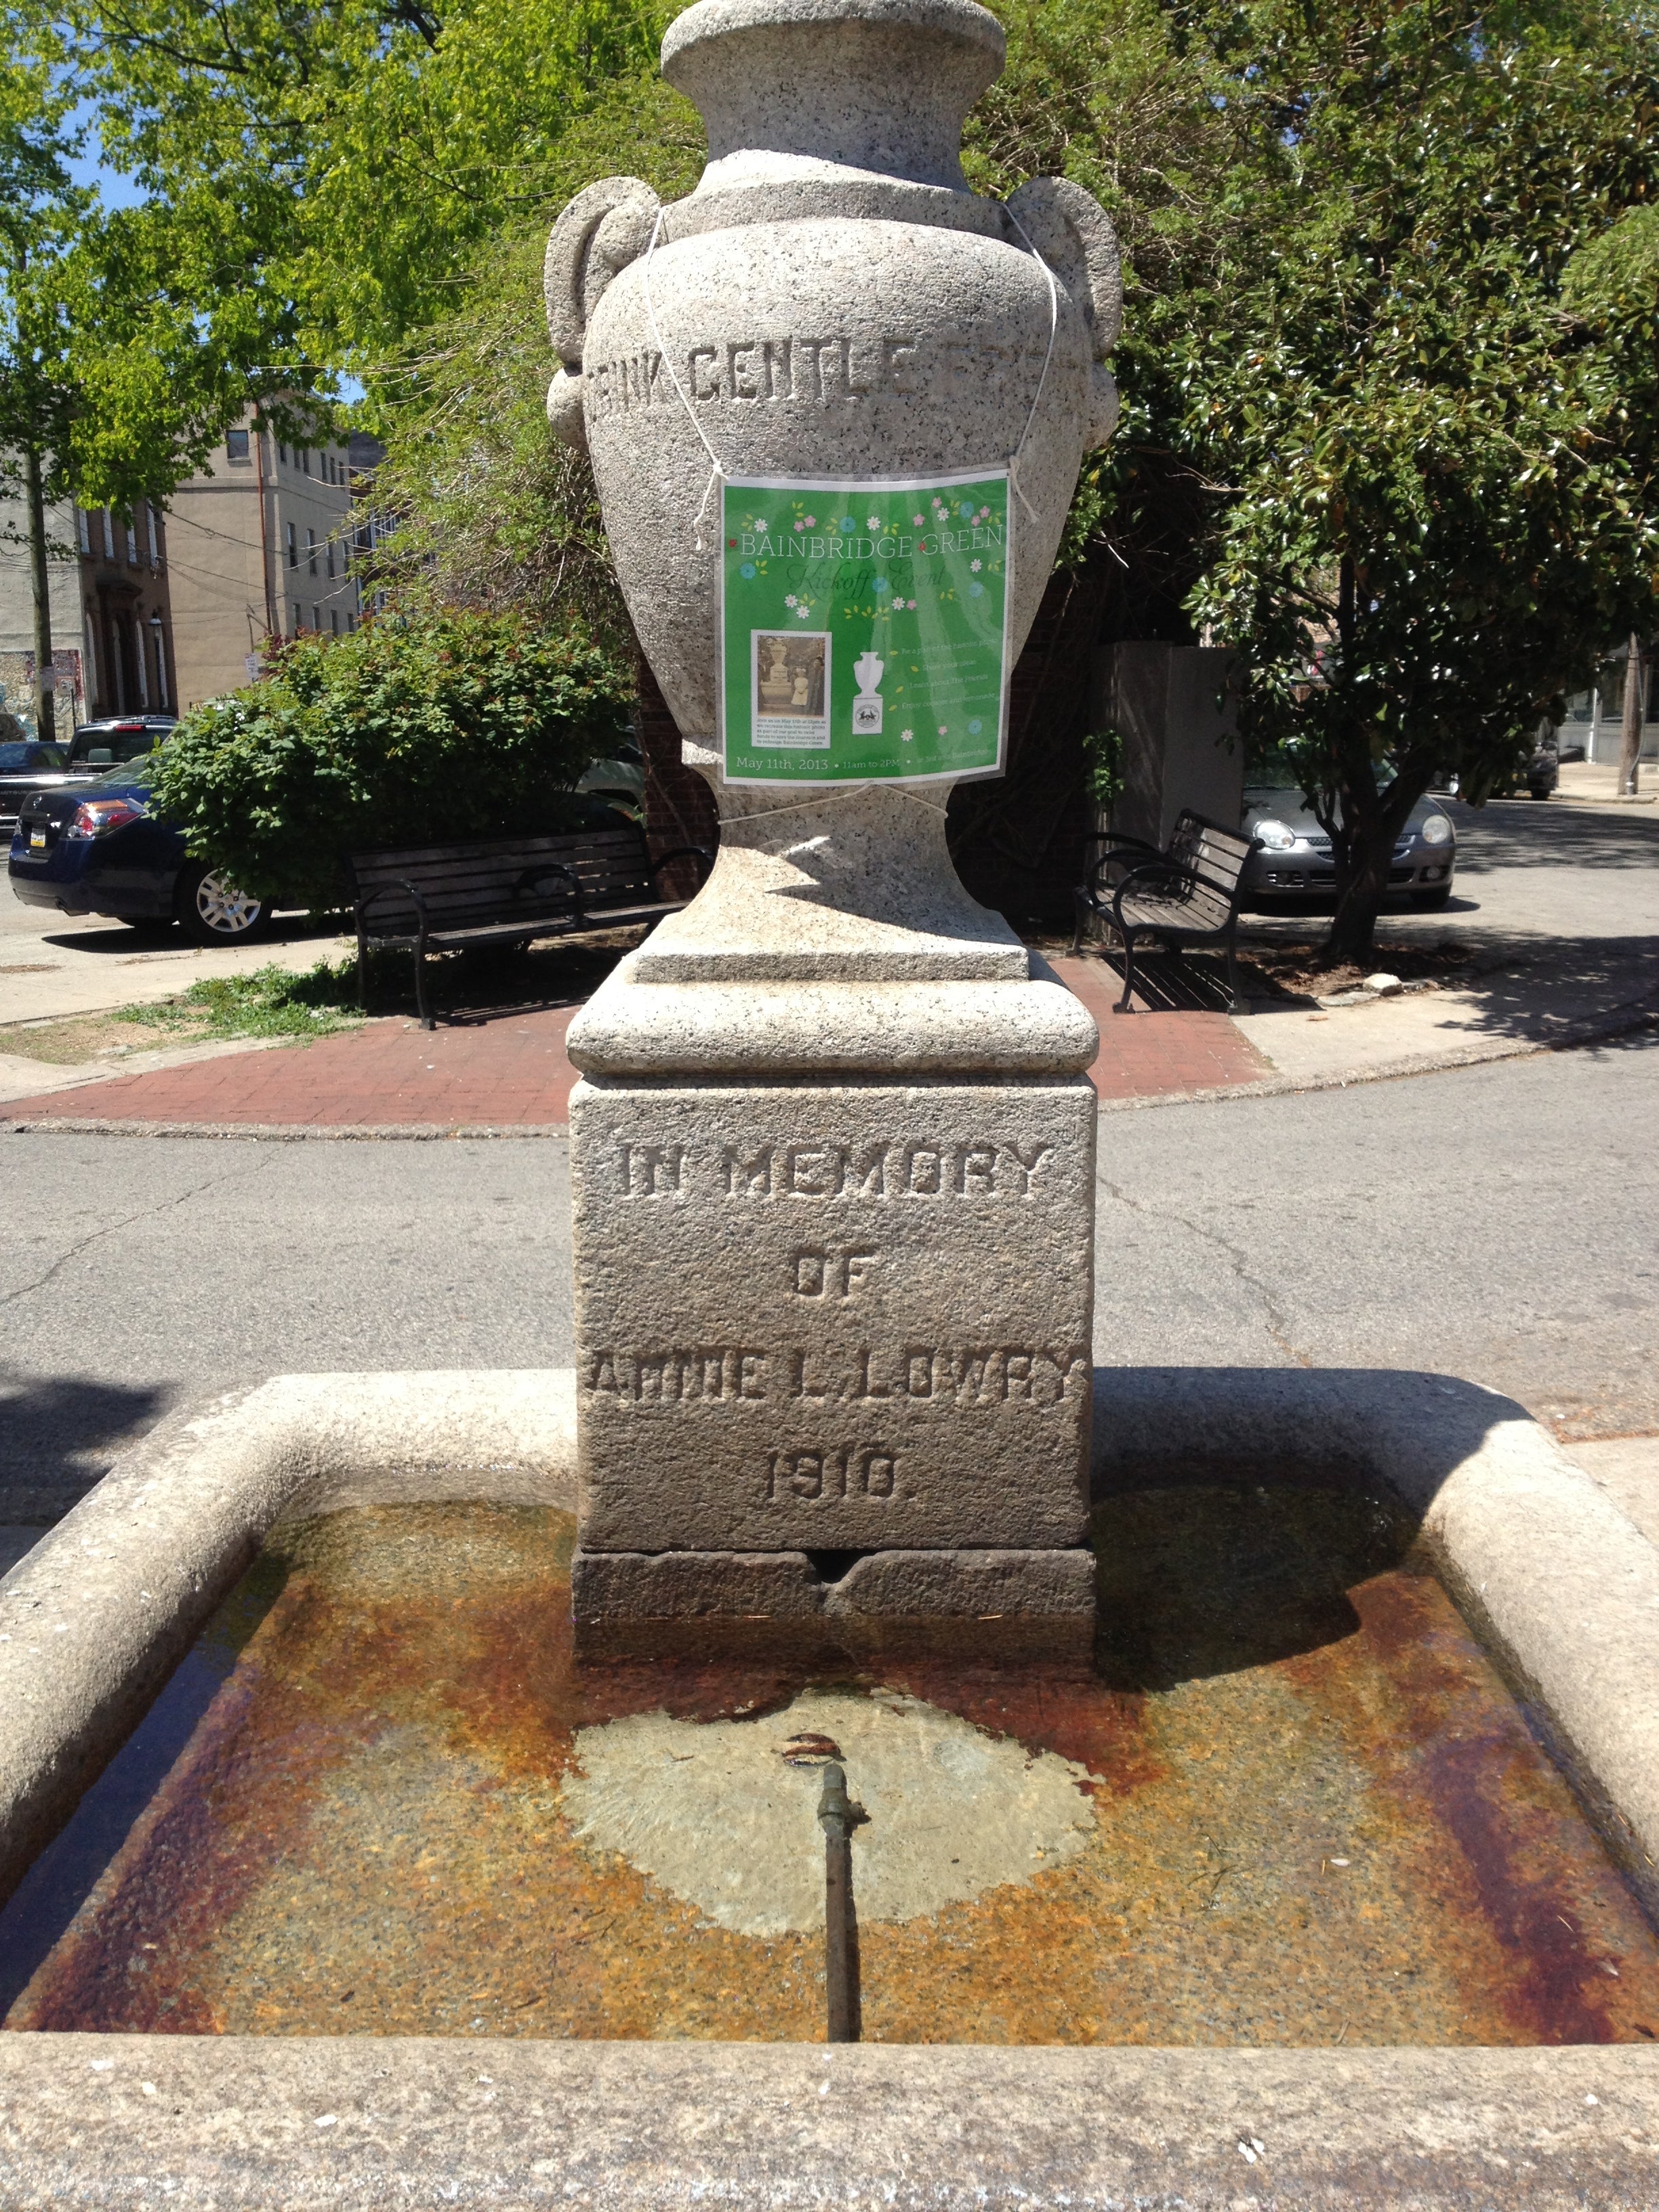 Drink Gentle Friends - This horse trough could anchor a redesigned plaza at the 3rd Street end of Bainbridge Green.